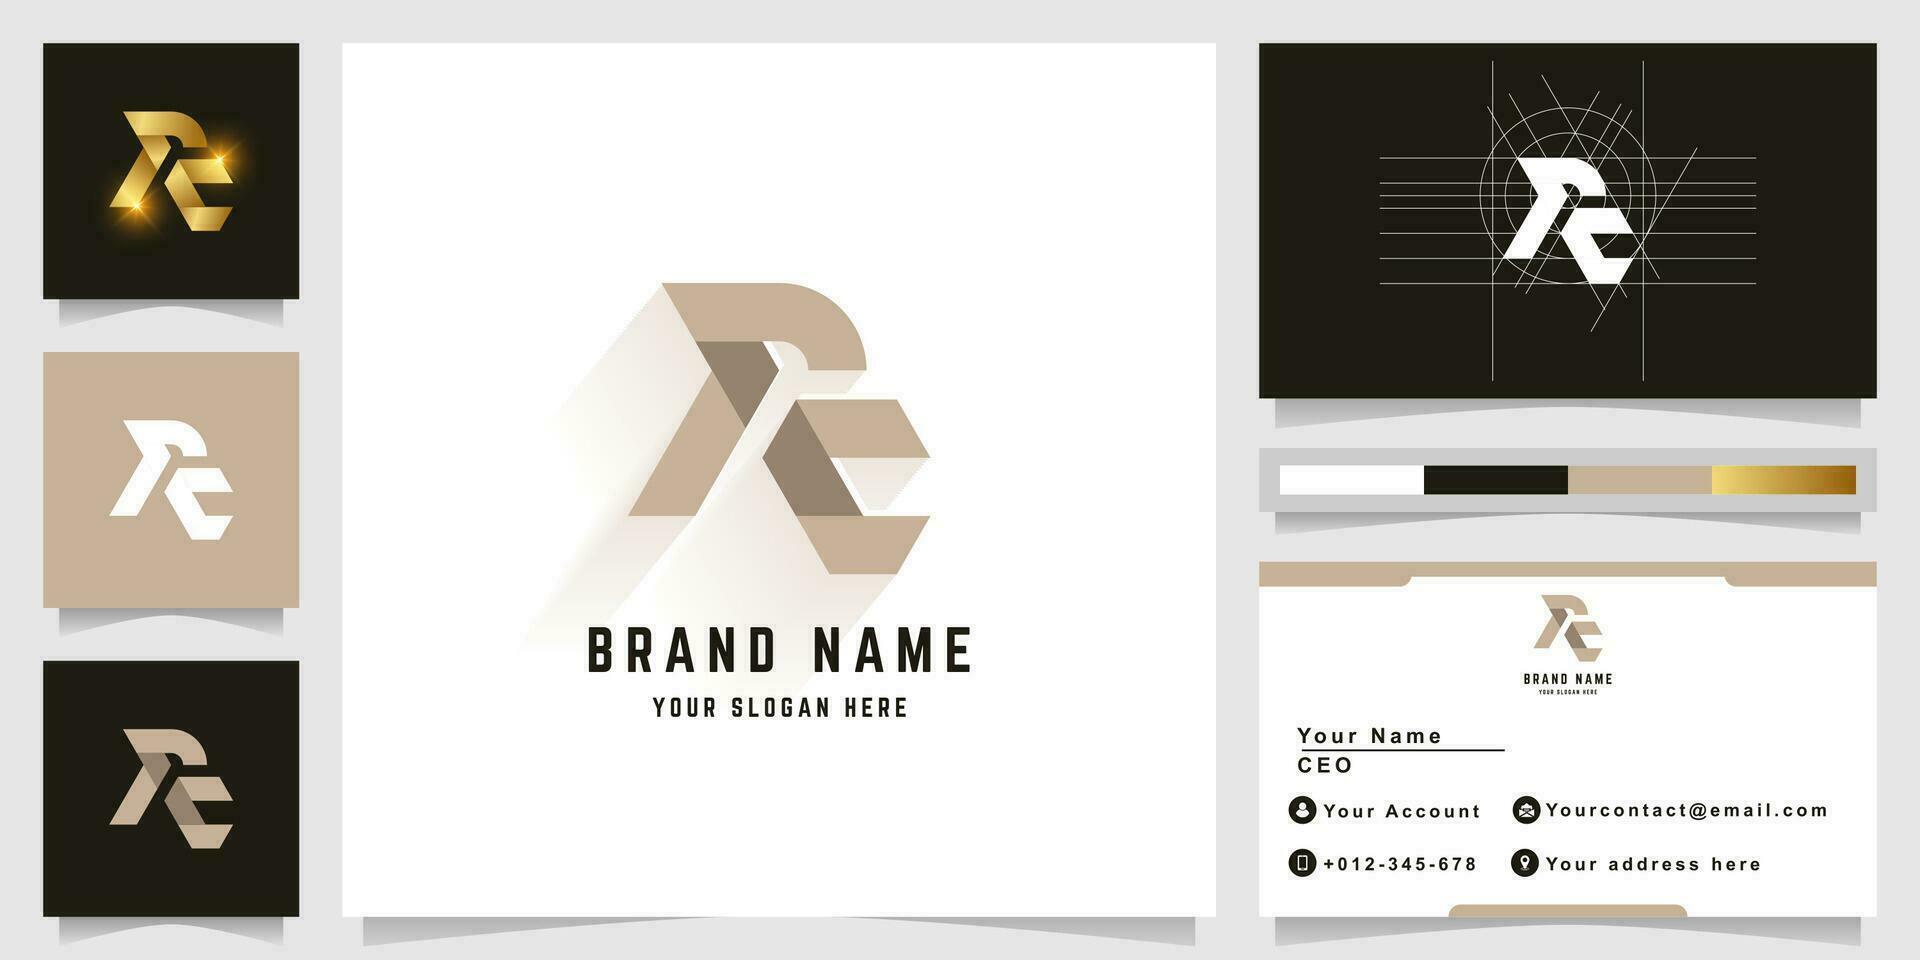 Letter RC or RE monogram logo with business card design vector